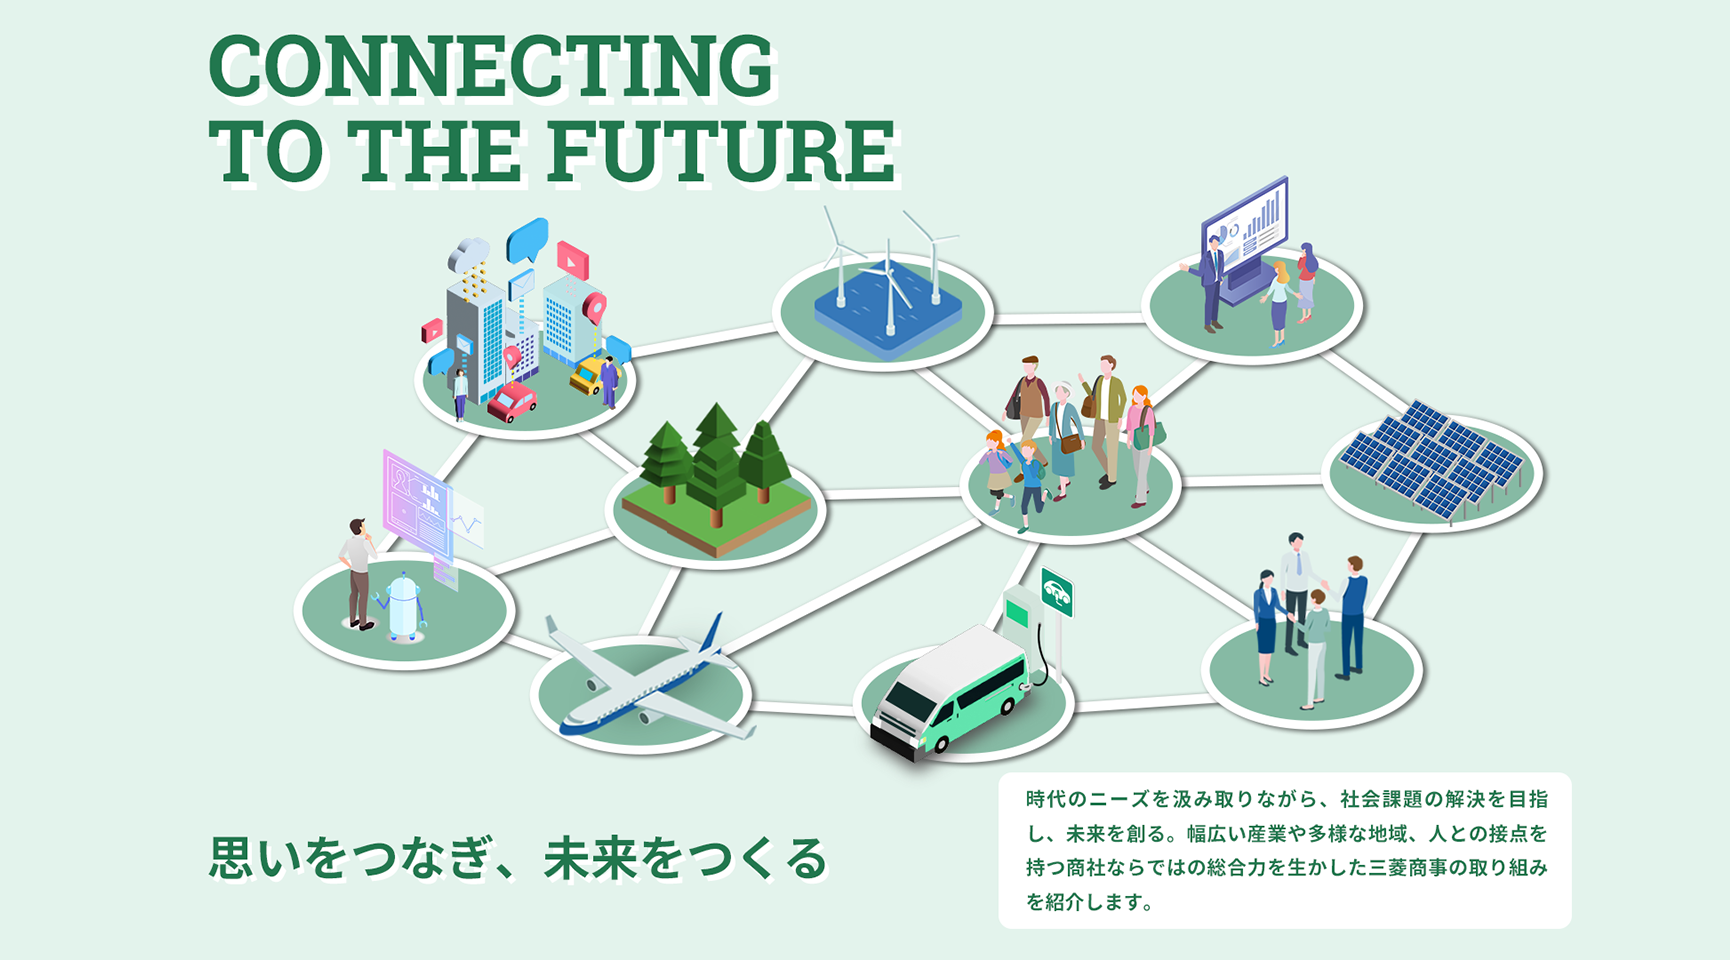 Connecting to the future 思いをつなぎ、未来をつくる